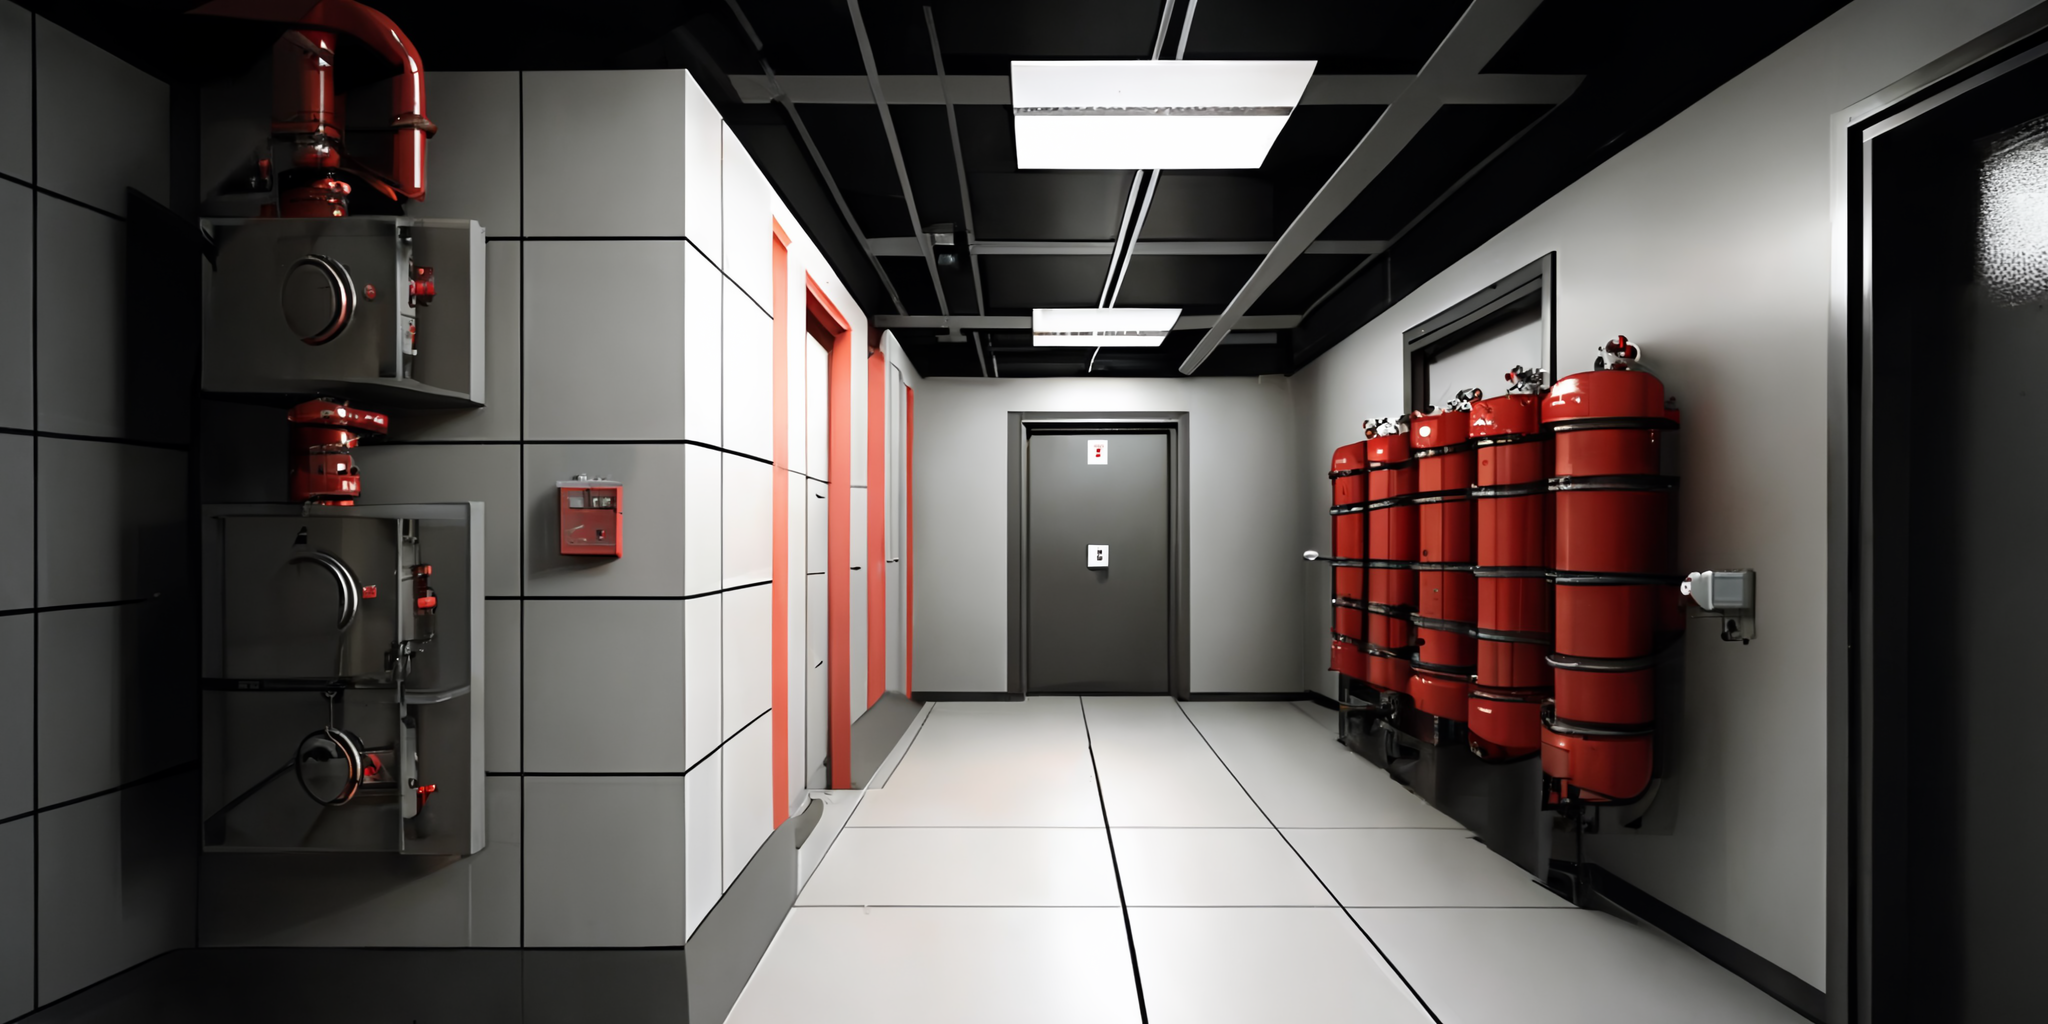 Fire Protection In Buildings